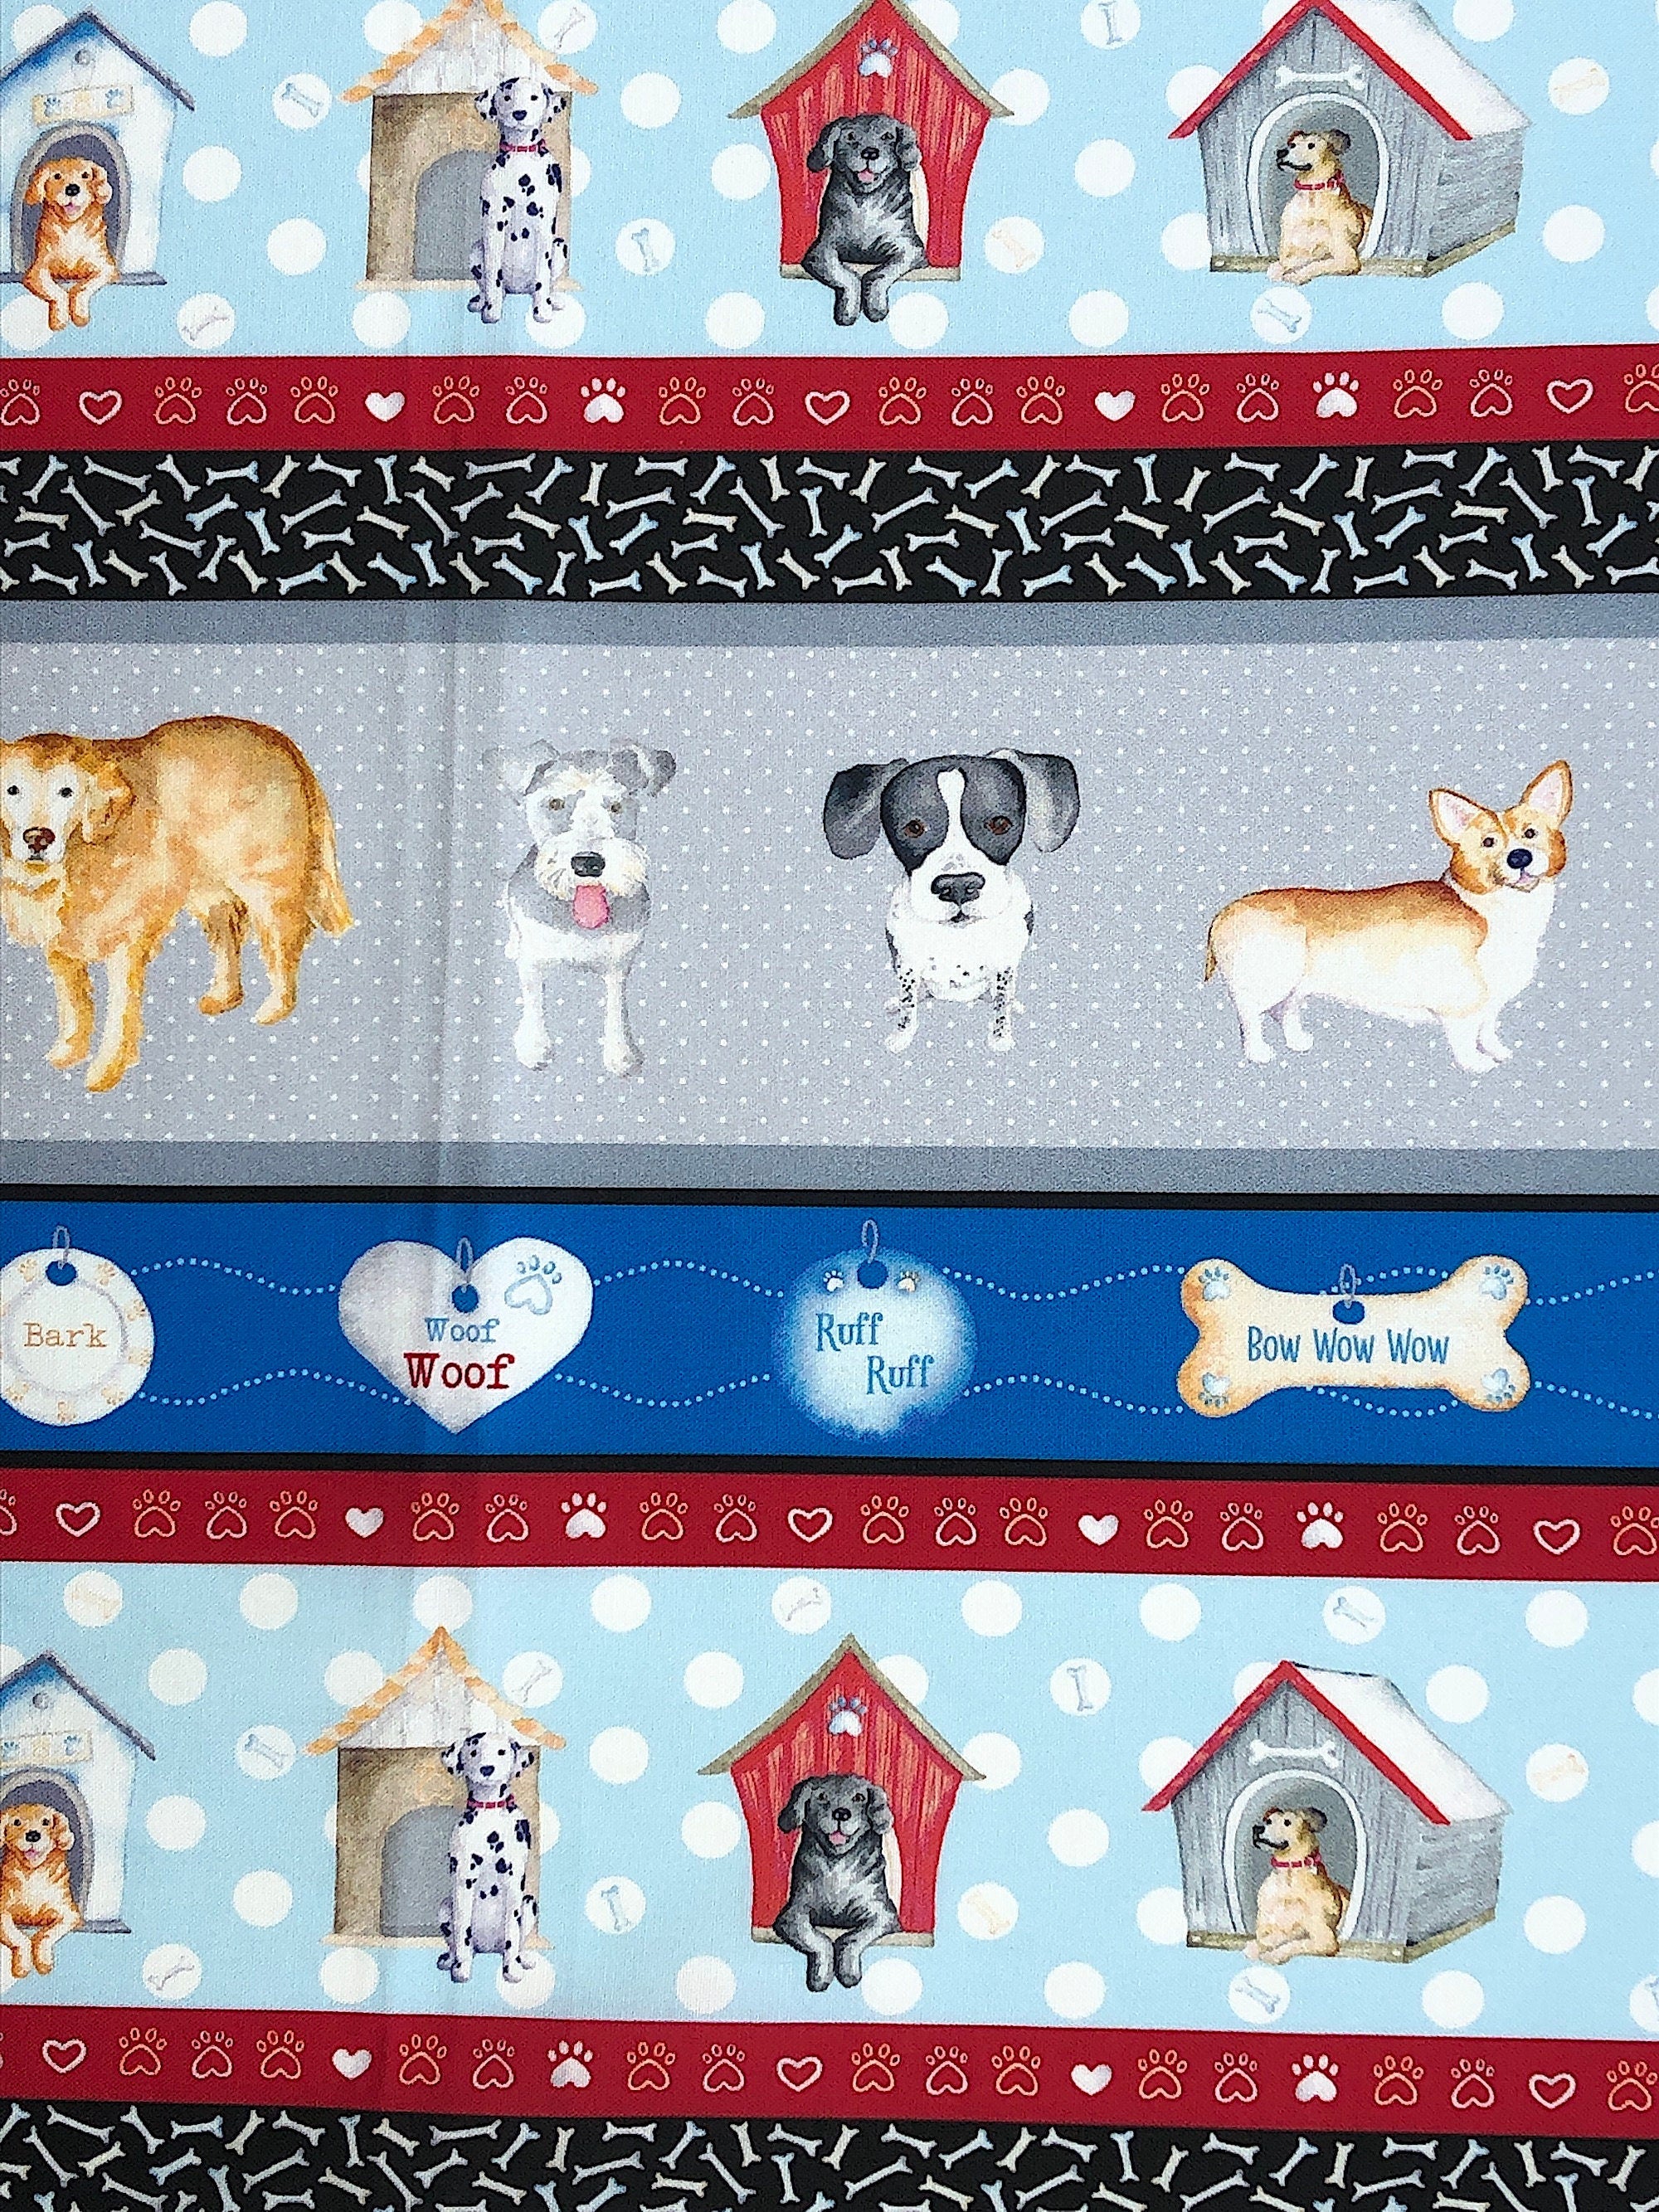 This light blue fabric is covered with strips of paw prints, dogs, dog houses, bones, dog collars and more. This fabric is part of the Think Pawsitive collection designed by Andi Metz.